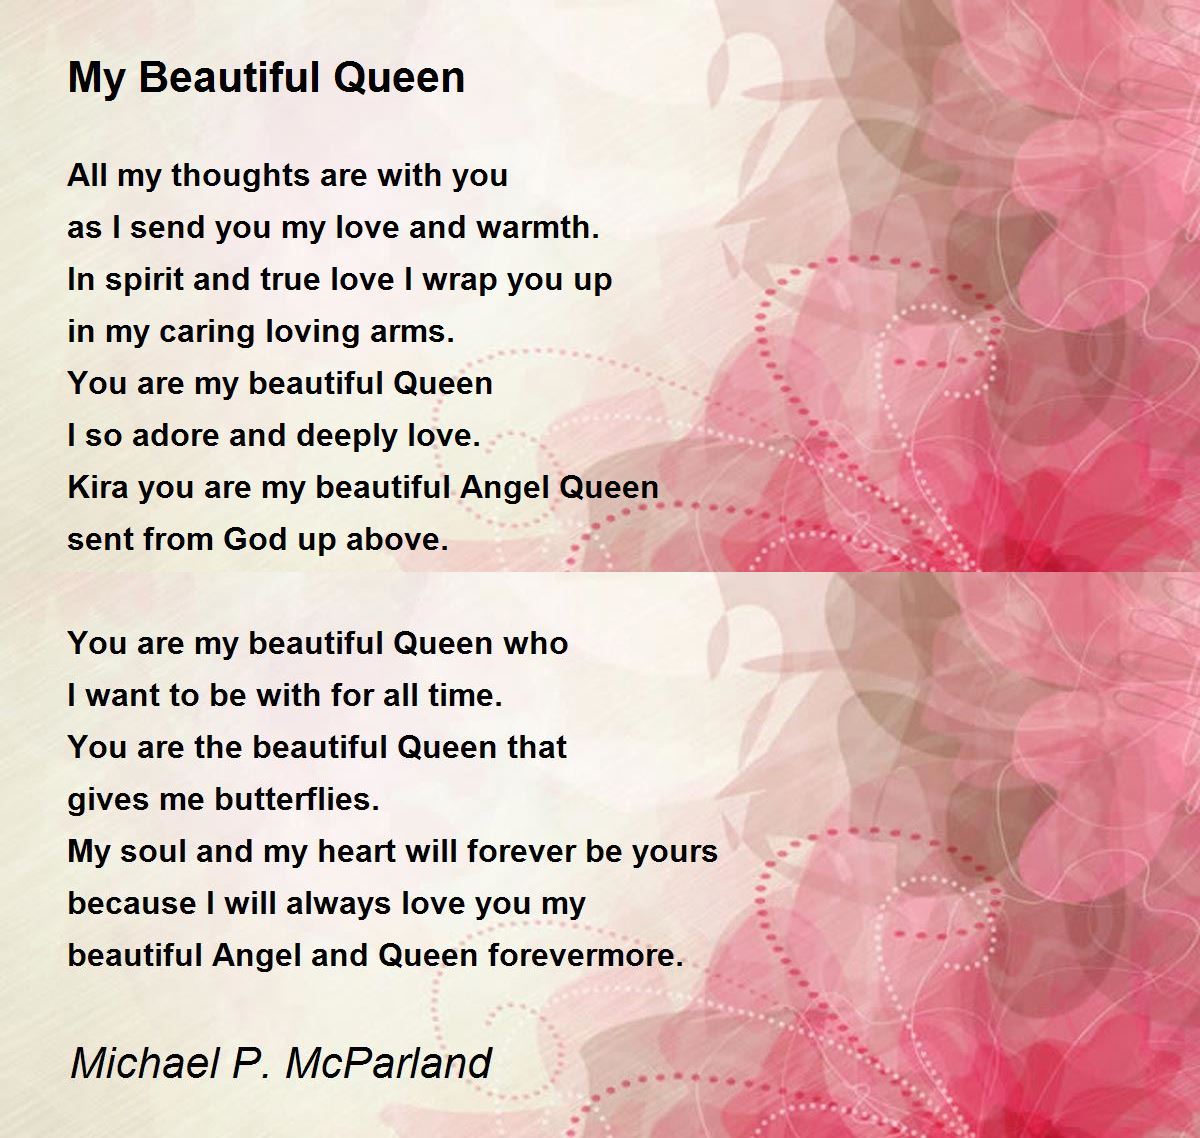 My Beautiful Queen - My Beautiful Queen Poem by Michael P. McParland